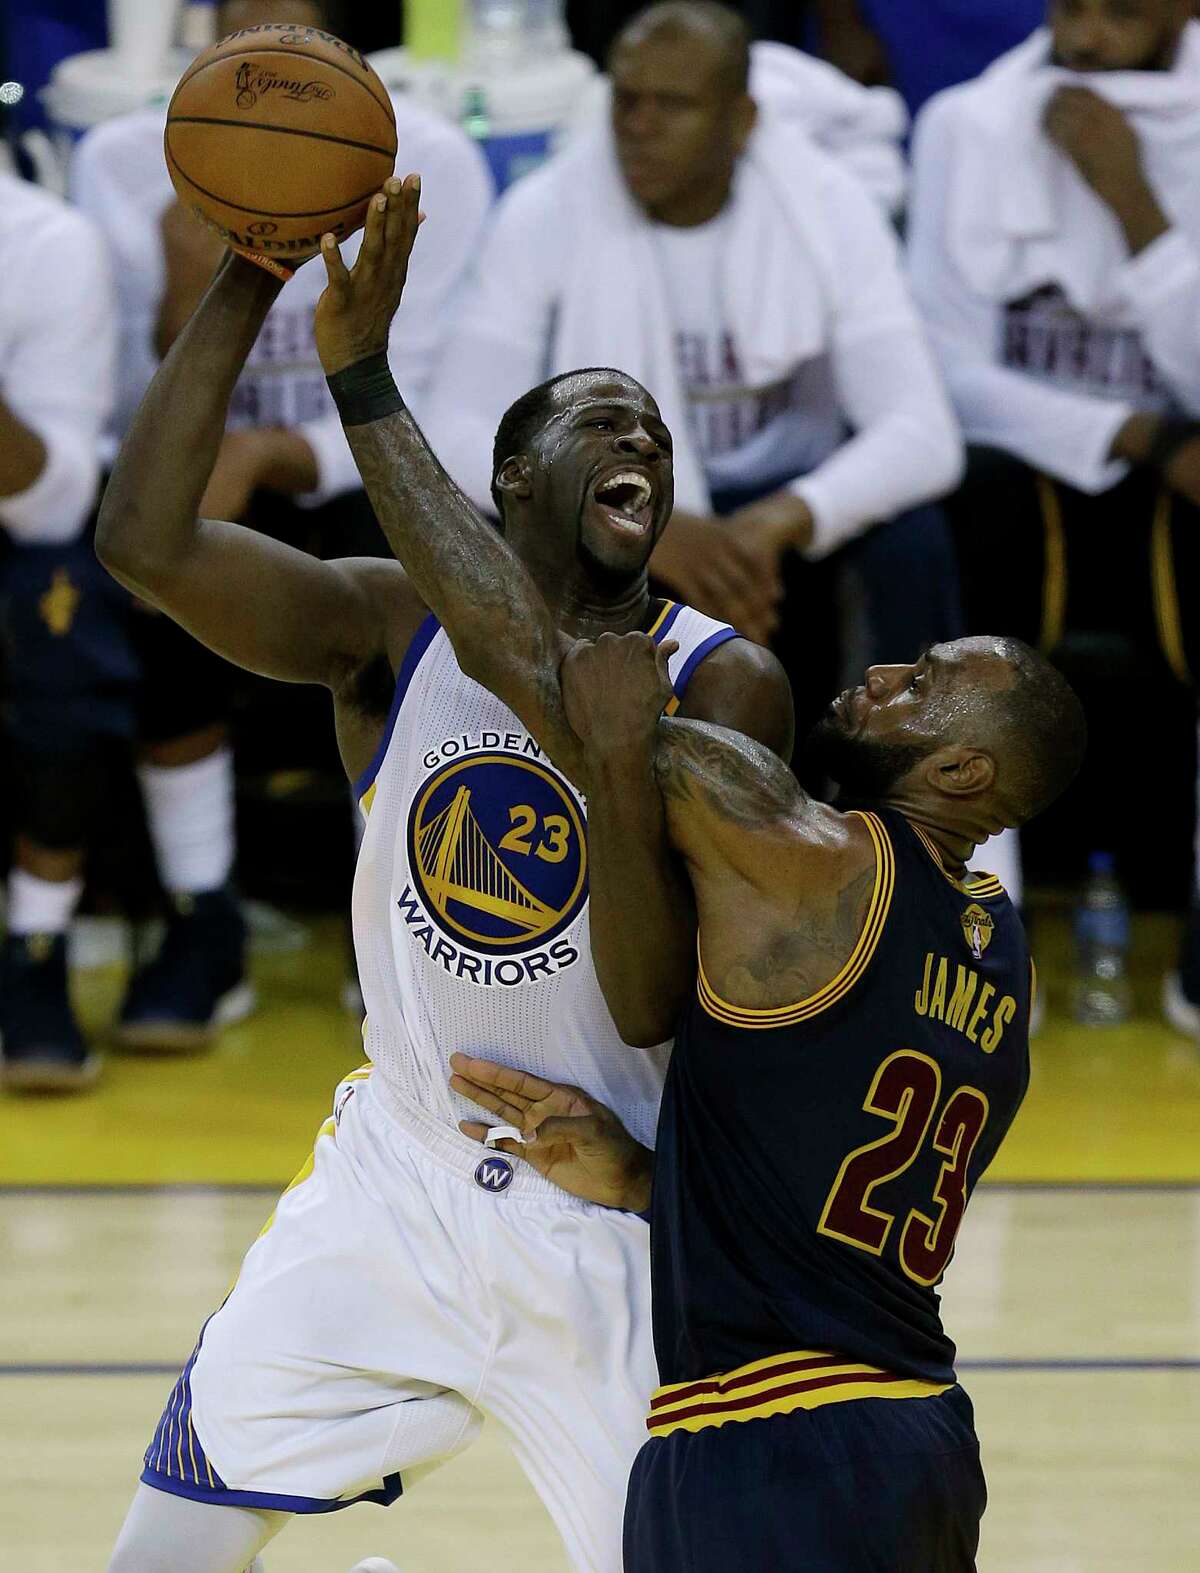 Golden State Warriors forward Draymond Green, left, shoots against Cleveland Cavaliers forward LeBron James during the second half of Game 1 of basketball's NBA Finals in Oakland, Calif., Thursday, June 1, 2017. (AP Photo/Ben Margot)